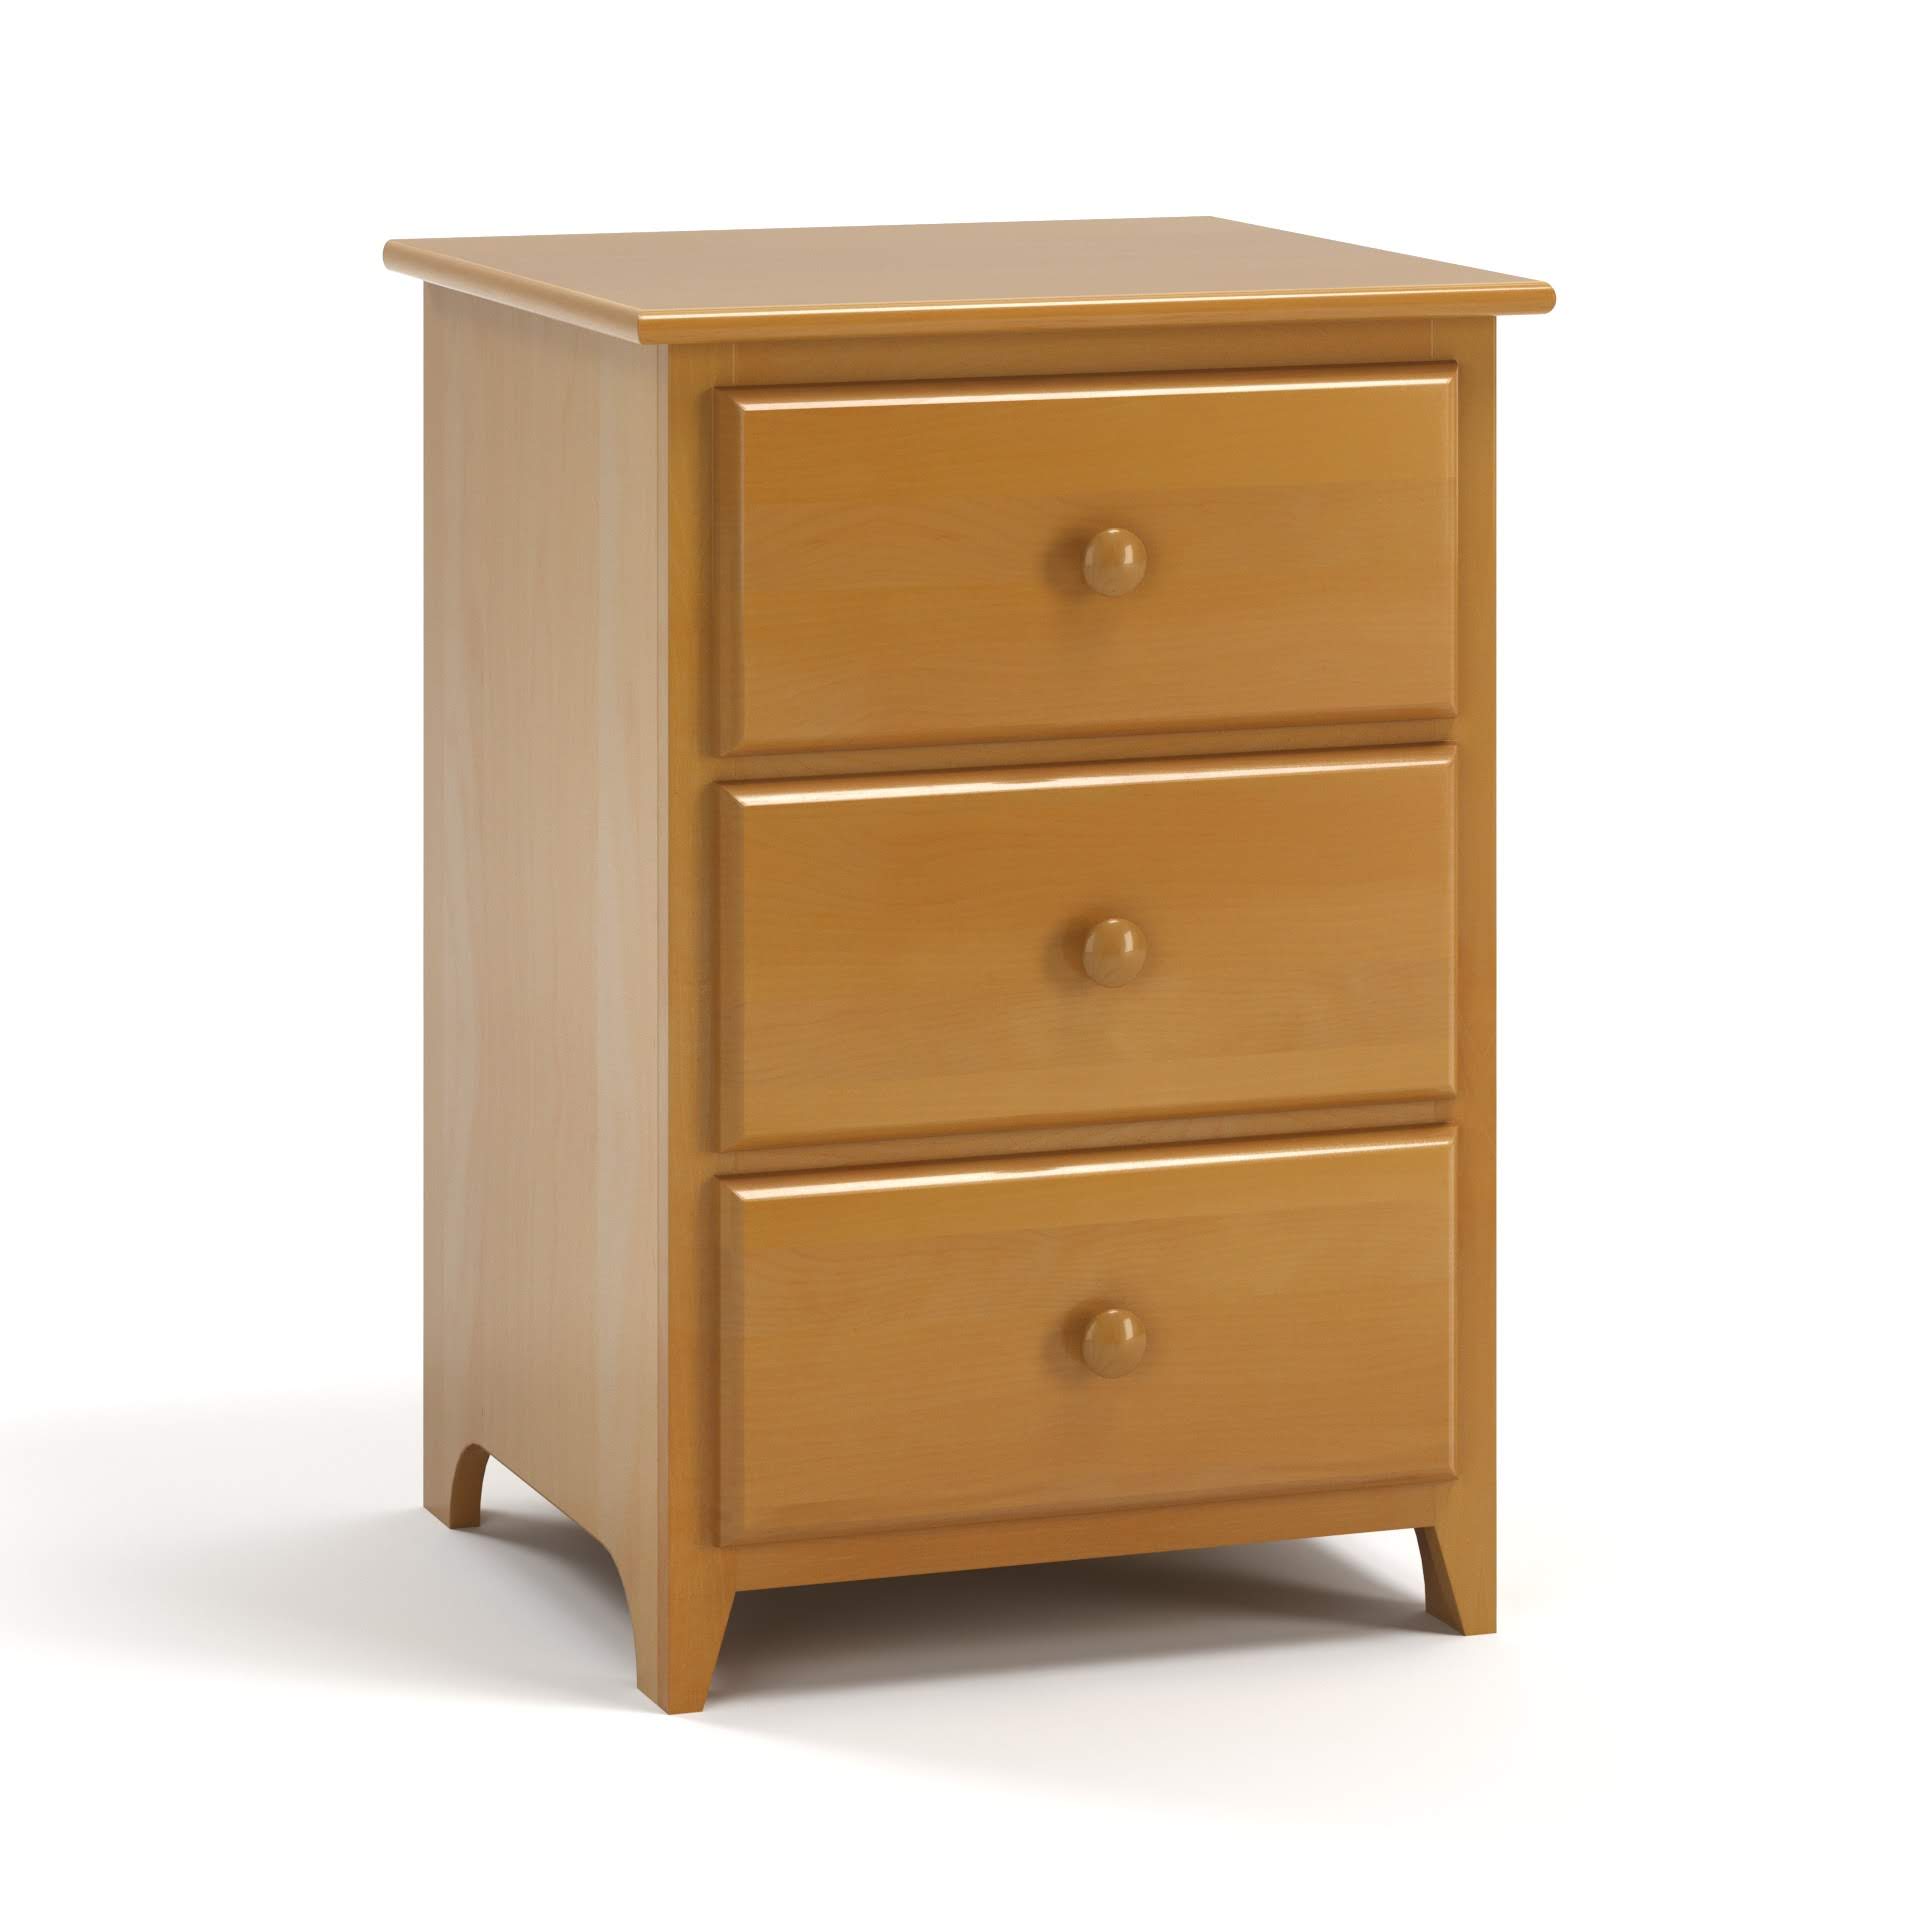 Acadia Shaker Three Drawer Nightstand is built with birch and includes three full extension drawers. Pictured in Autumn Gold.